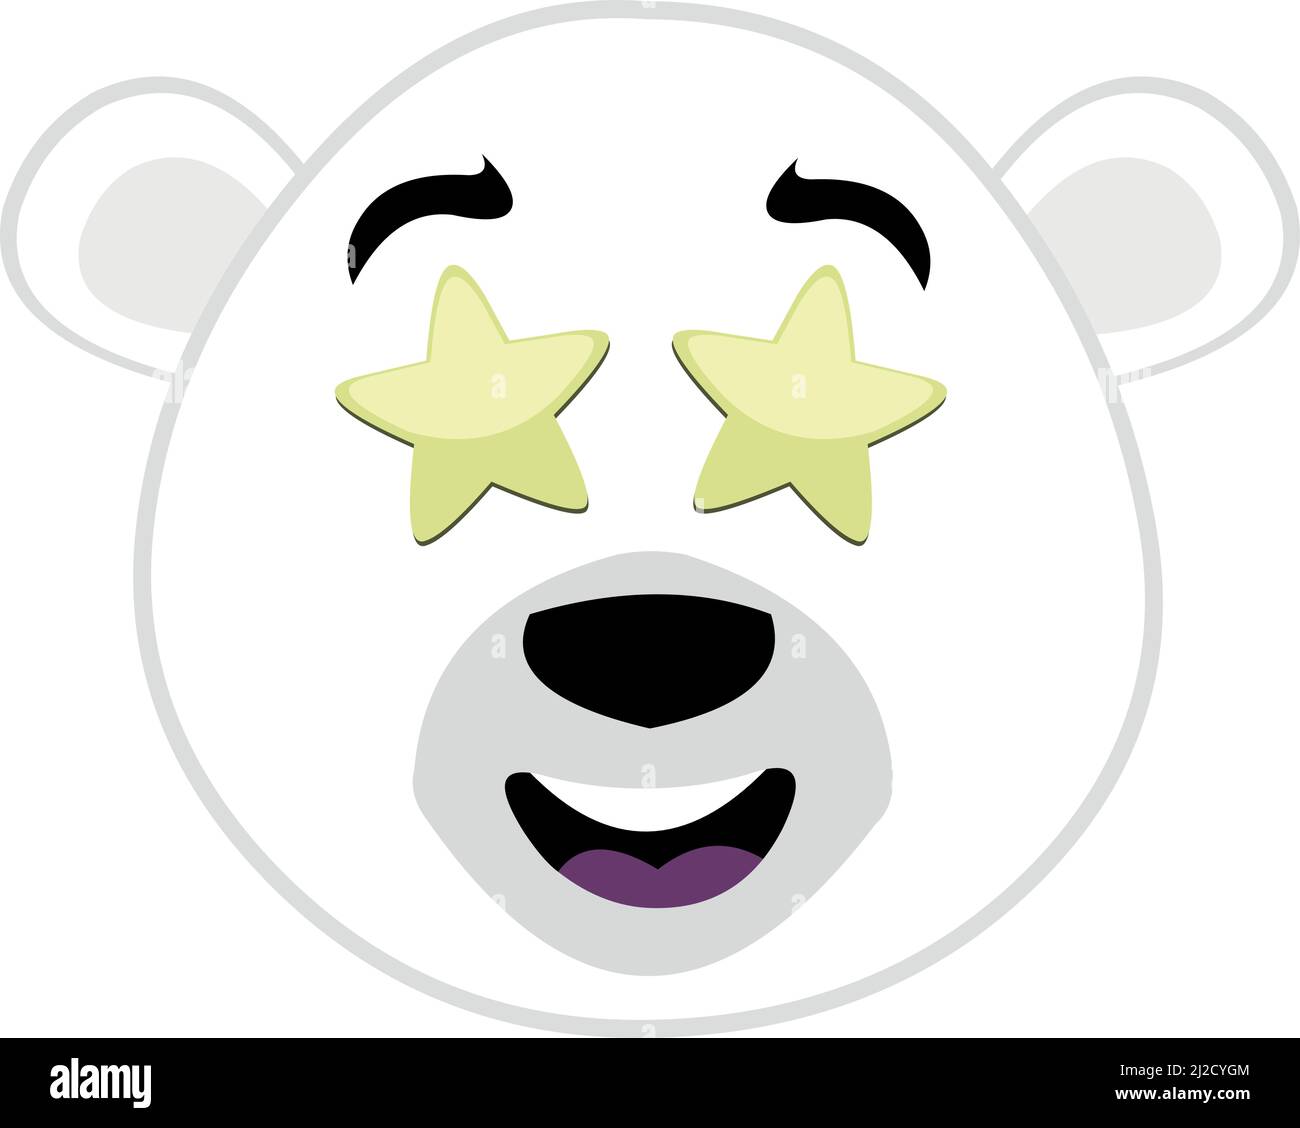 Vector illustration of the face of a cartoon polar bear with an expression of wonder with eyes in the form of stars Stock Vector